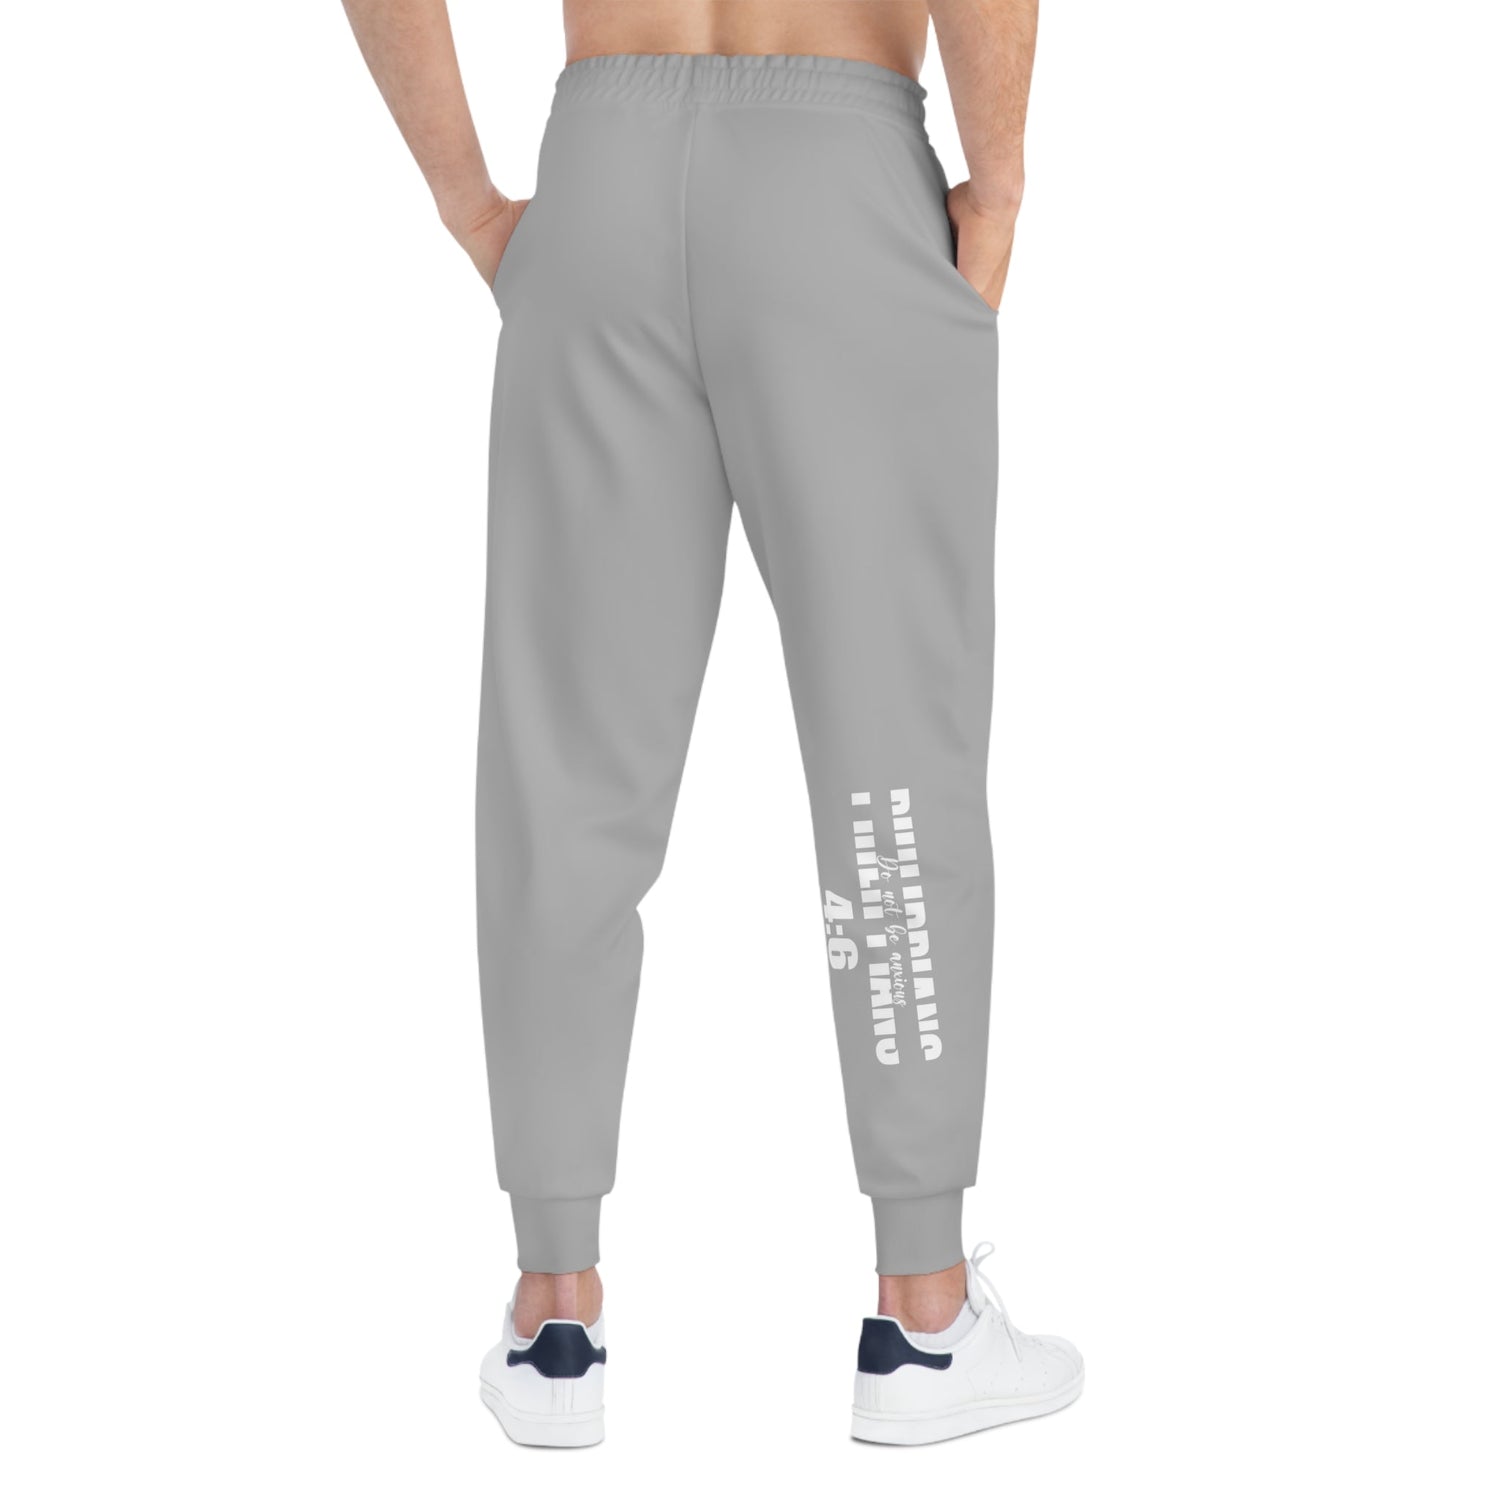 Do Not be Anxious Gray Unisex Athletic Joggers-All Over Prints-Wear What Inspires You